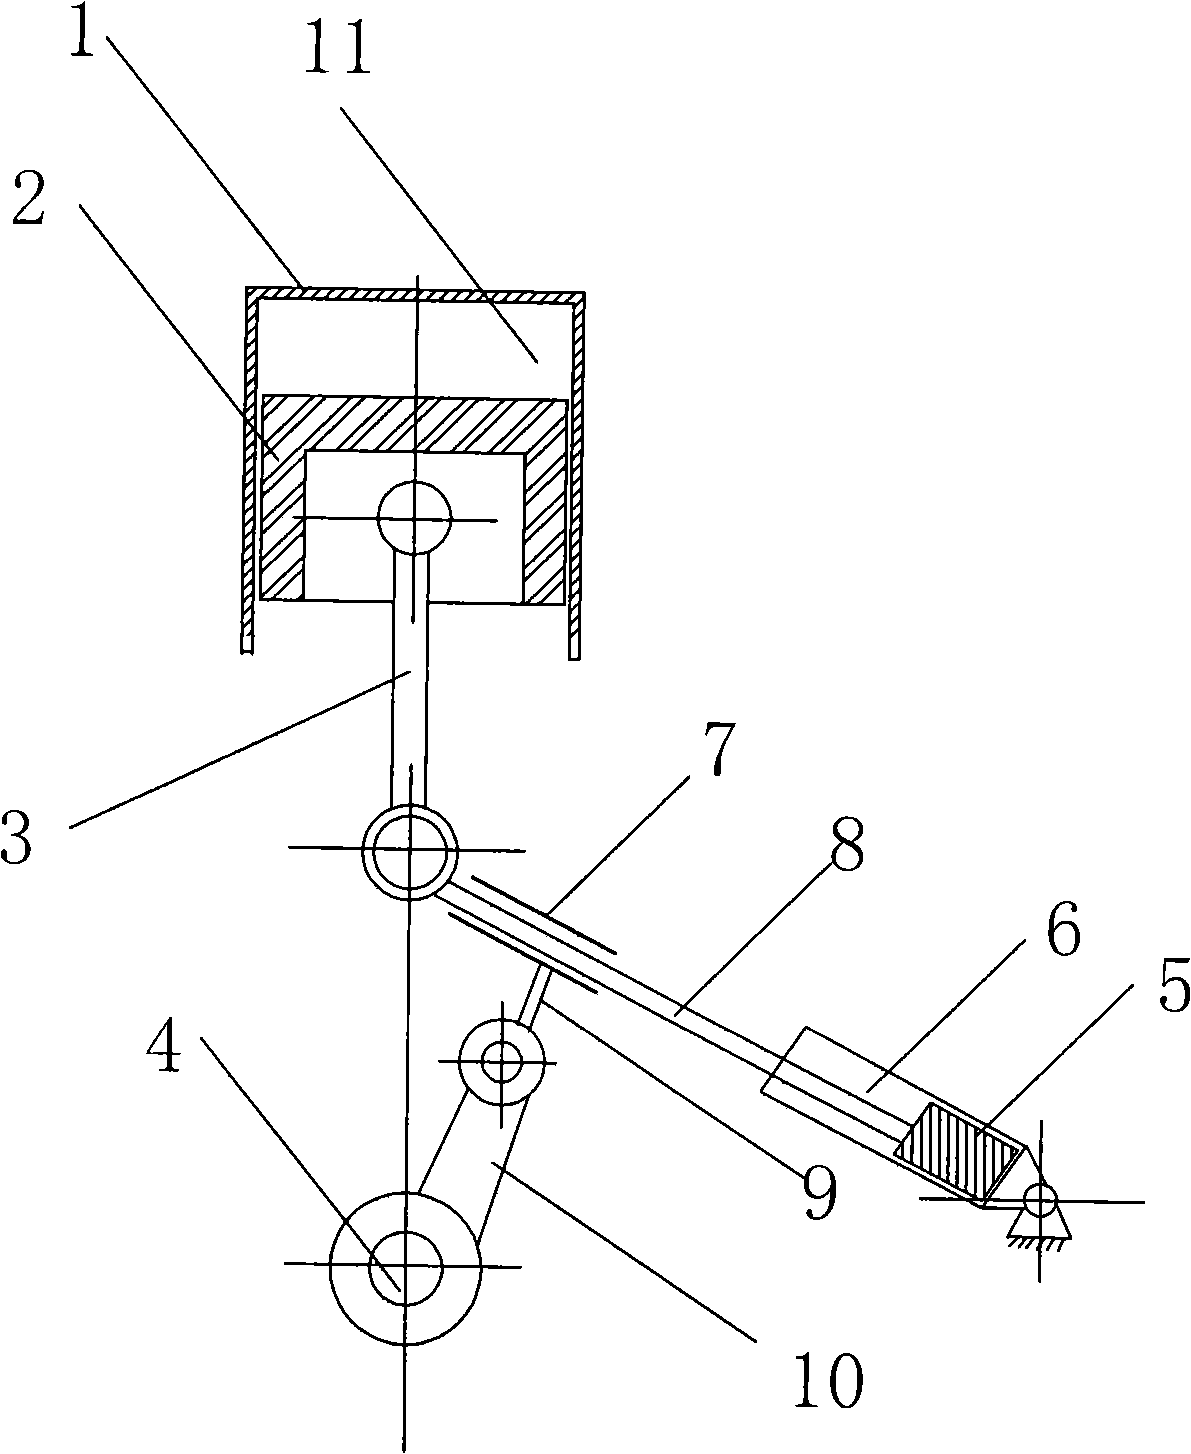 Engine with variable compression ratio